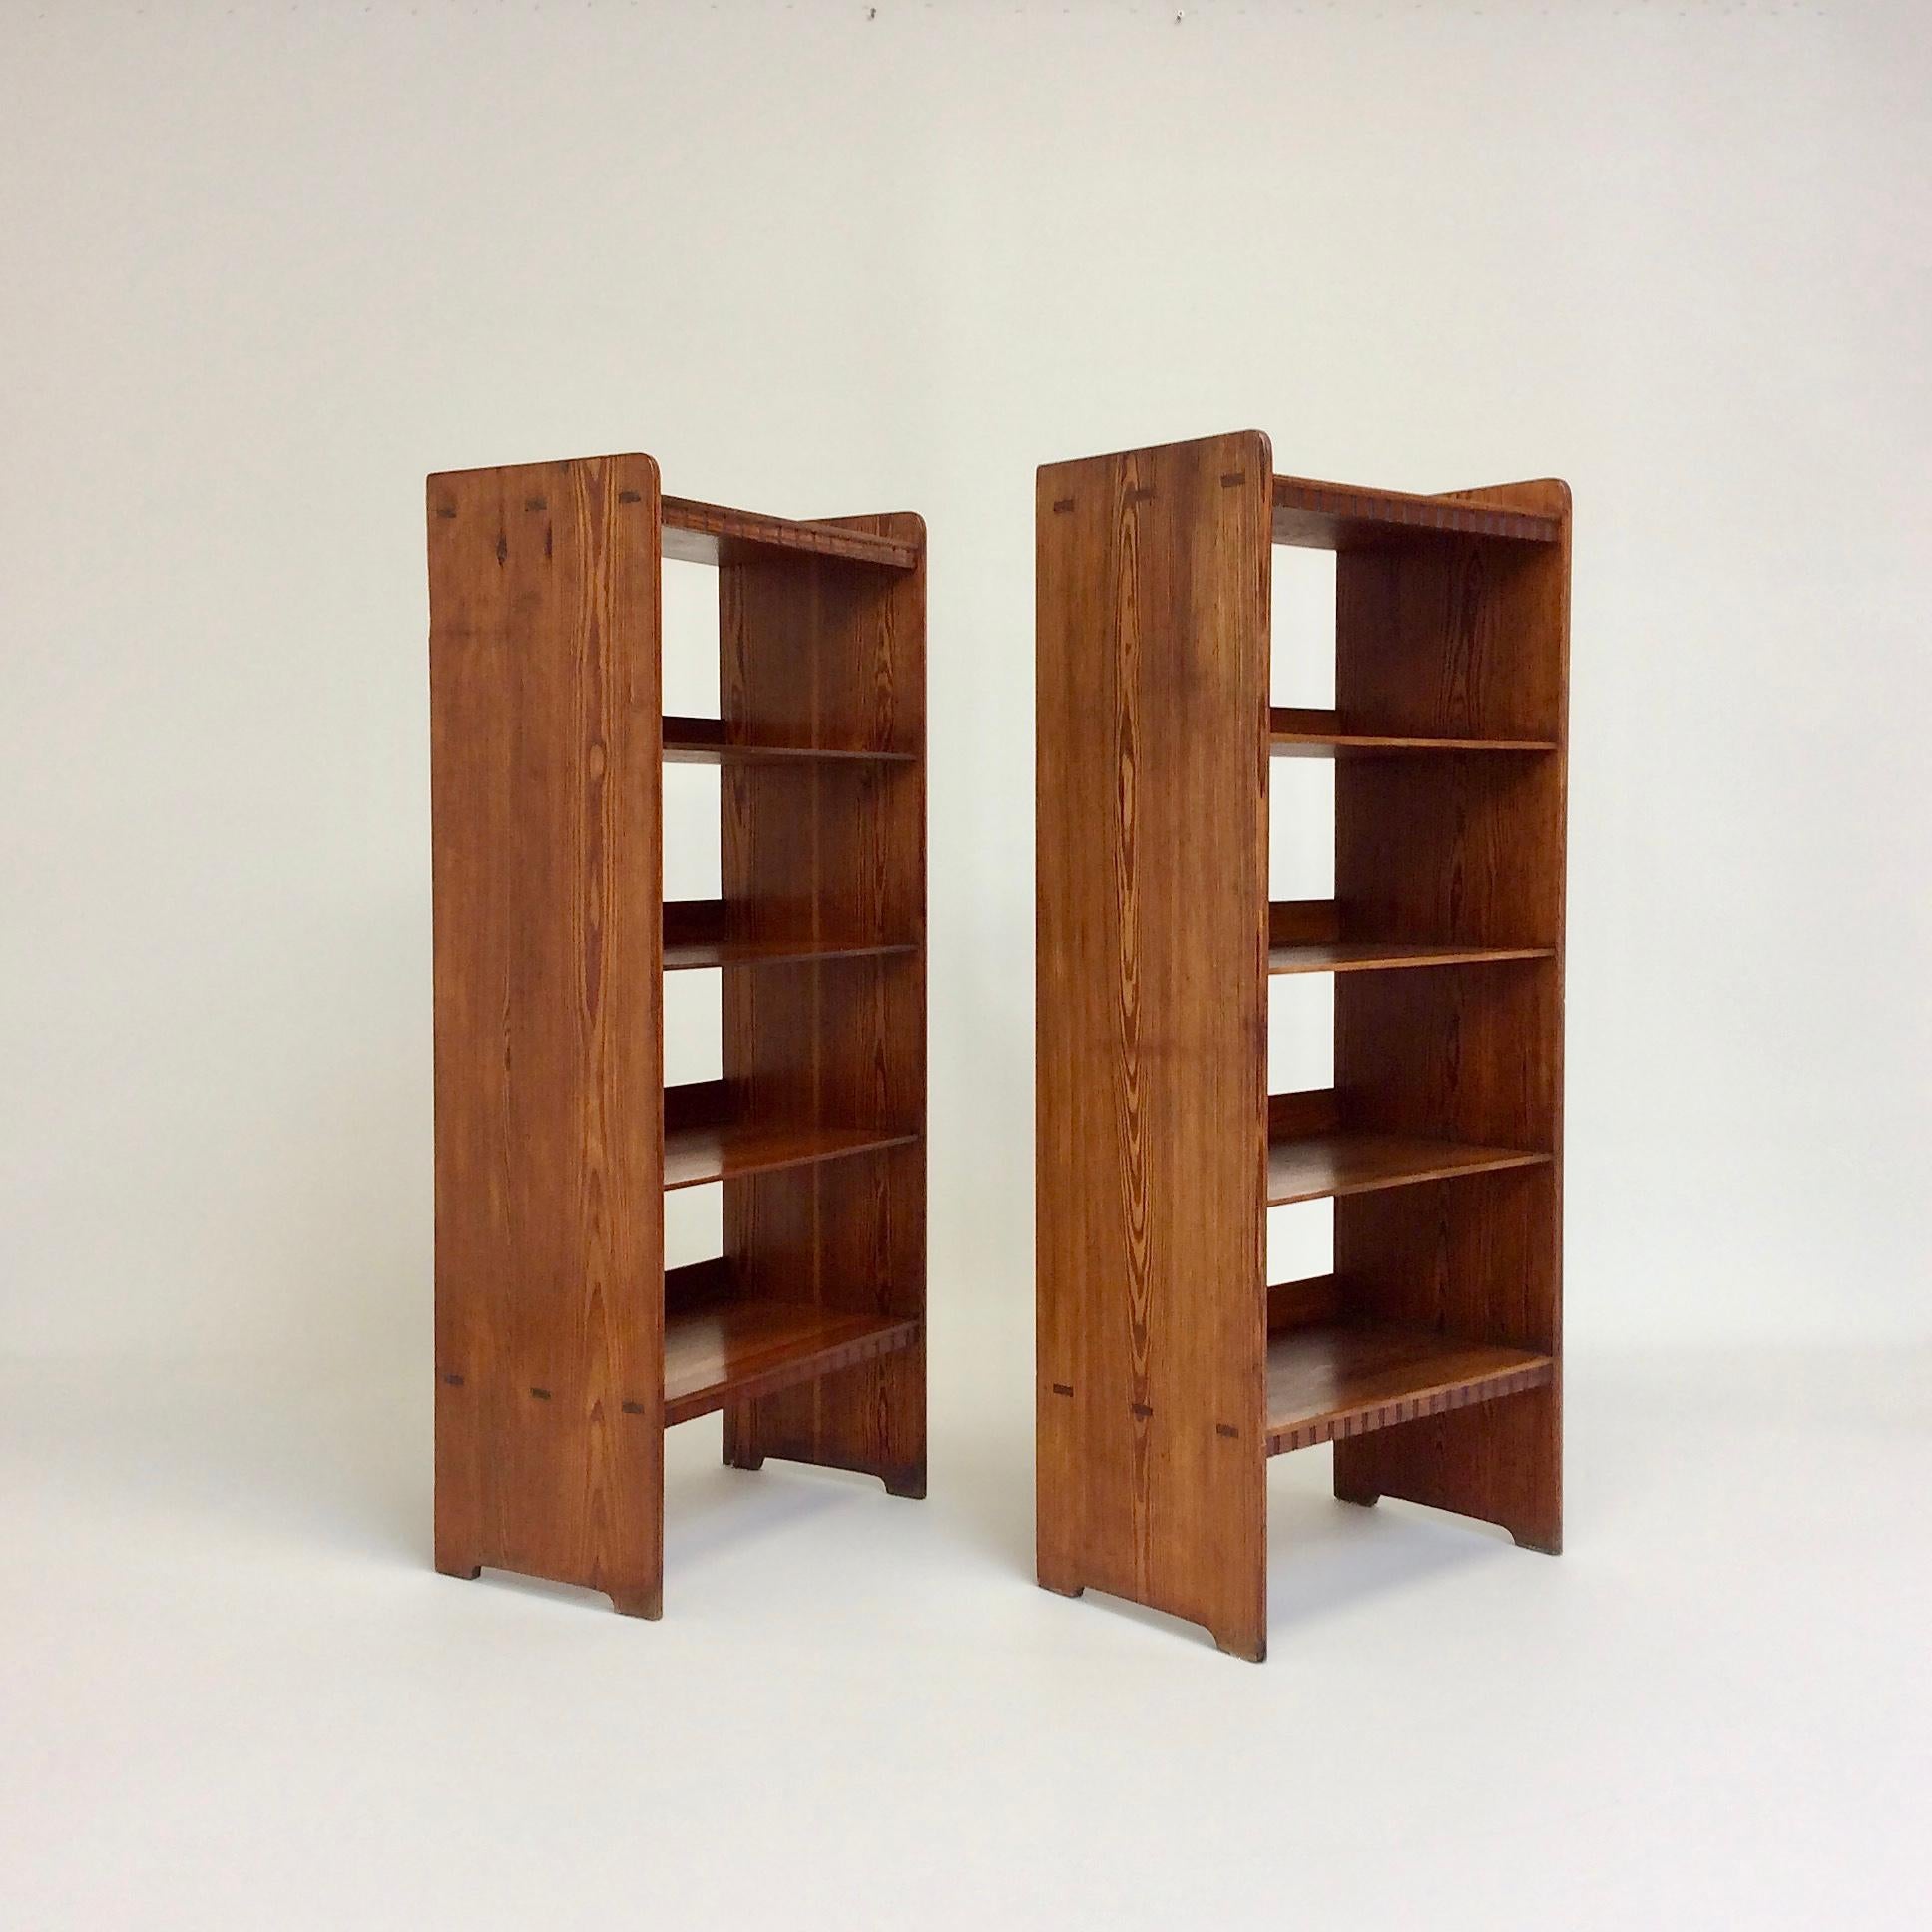 Rare pair of bookcases by Martin Nyrop, for Rud Rasmussen, circa 1930, Denmark.
Solid pine.
Provenance: Copenhagen City Hall.
Dimensions: 146 cm H, 64 cm W, 38 cm D, space between each shelves 27 cm.
Good original condition.
All purchases are